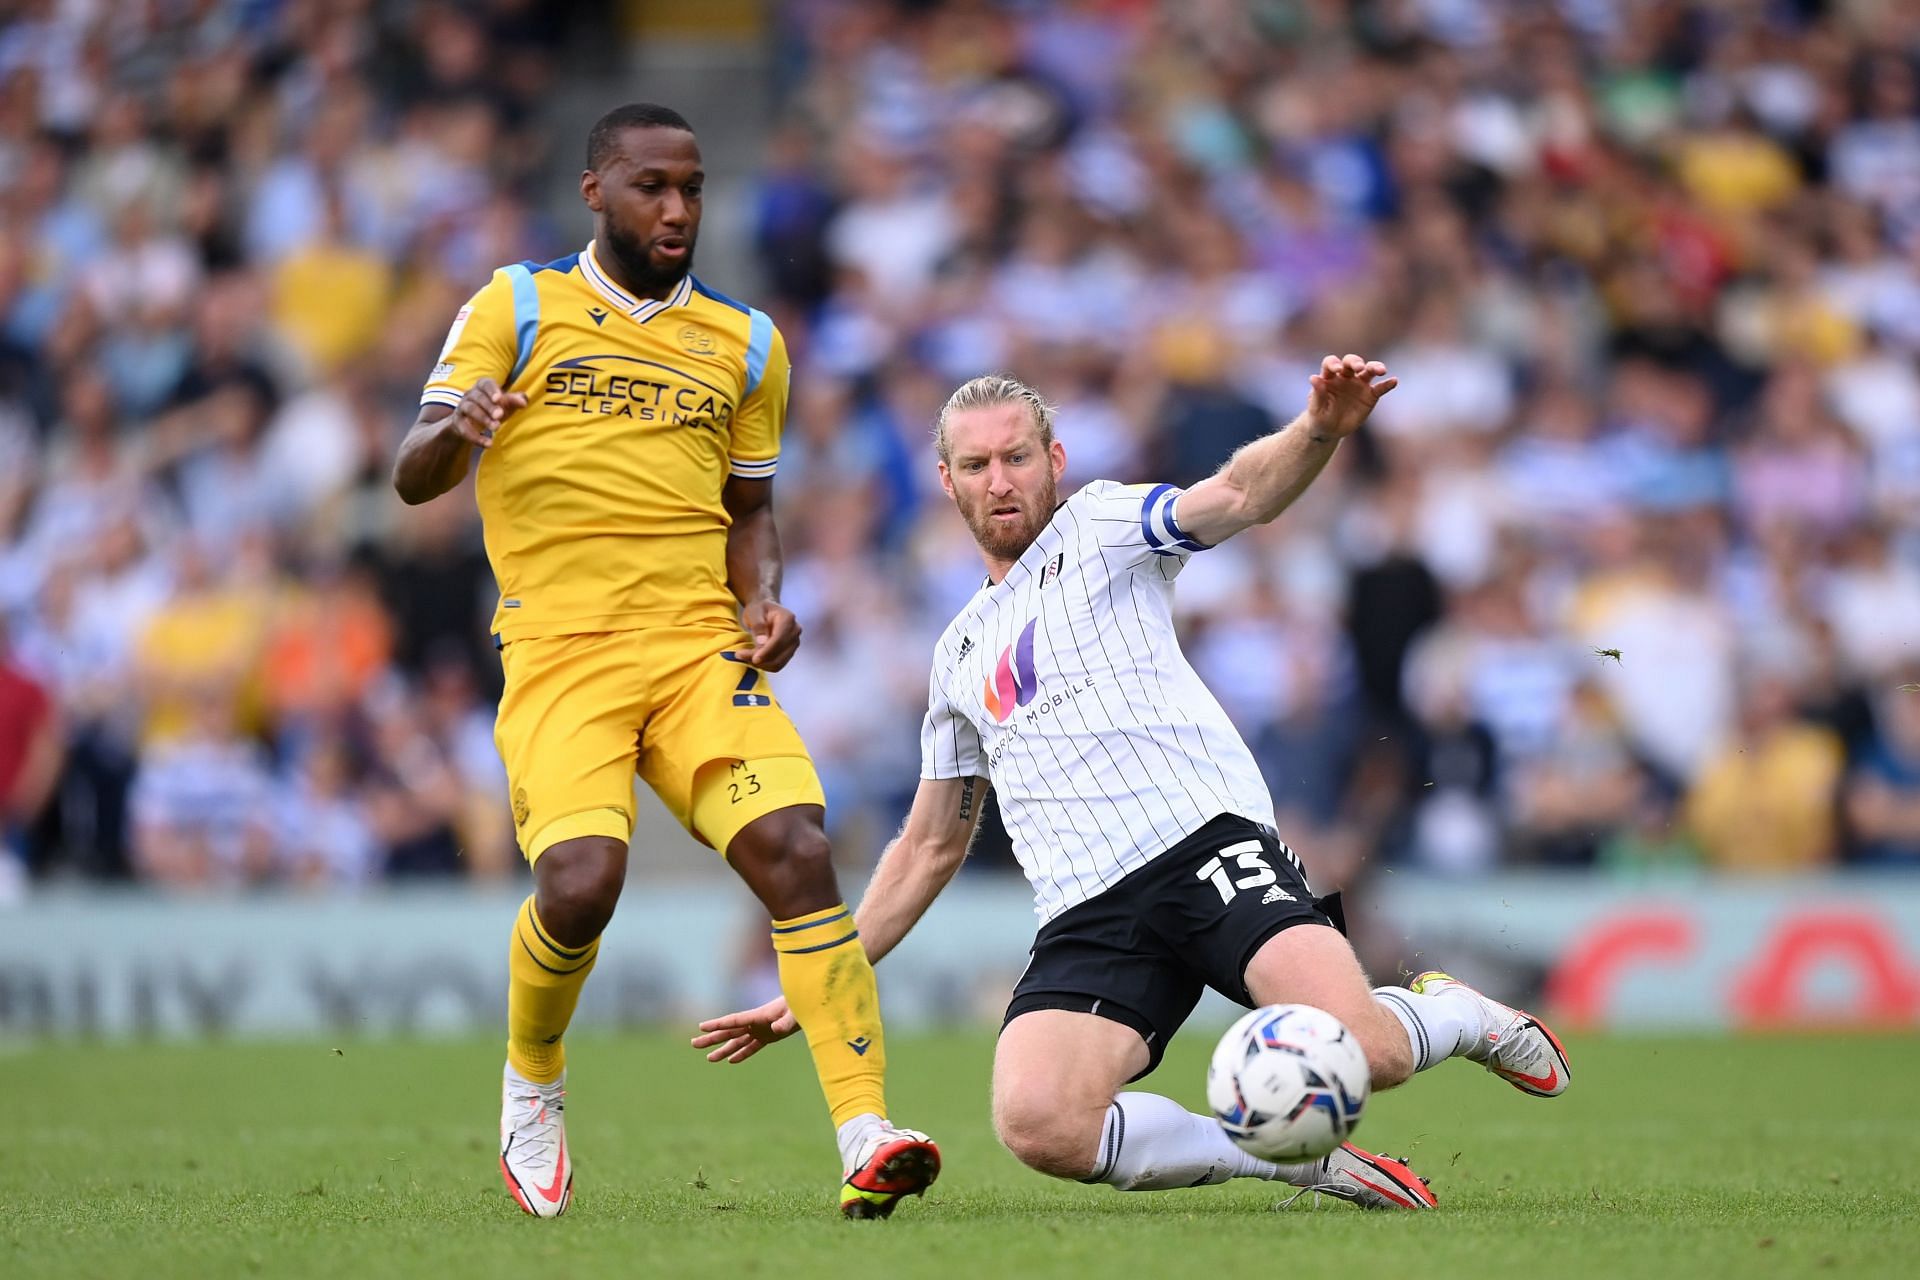 Hoilett will be a huge miss for Reading